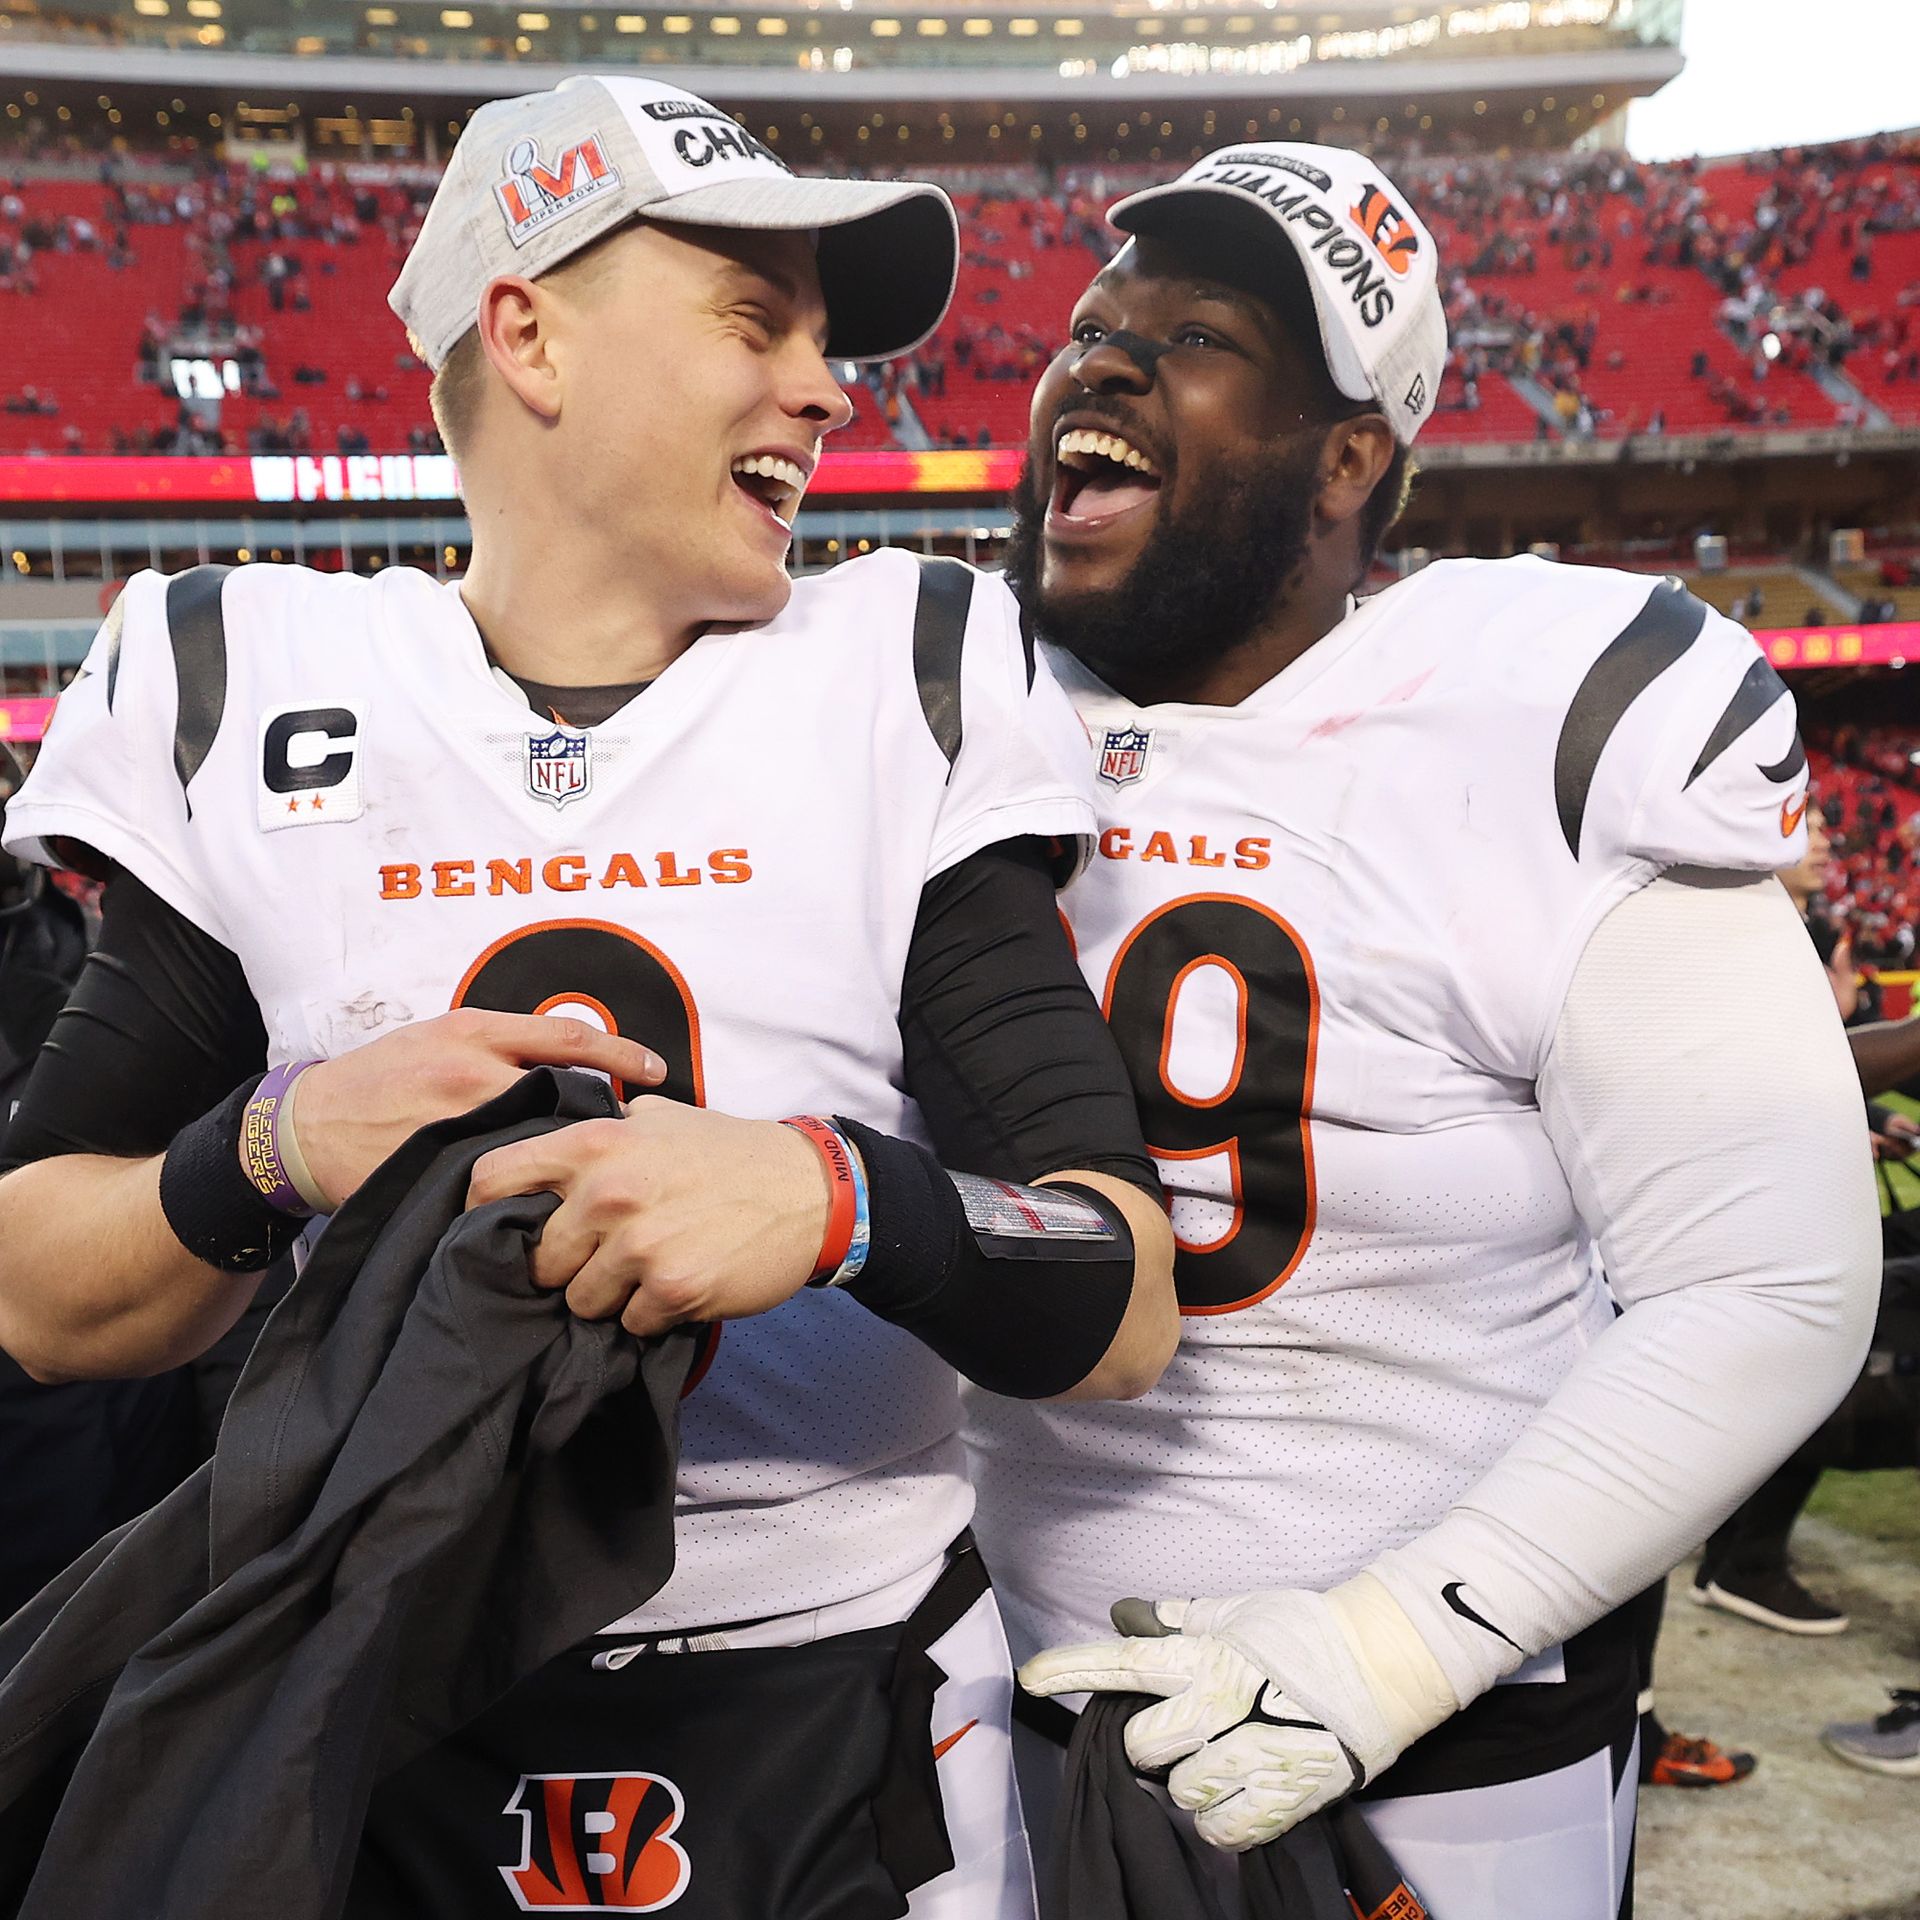 Cincinnati Bengals AFC champs, Super Bowl bound: Where to buy hats